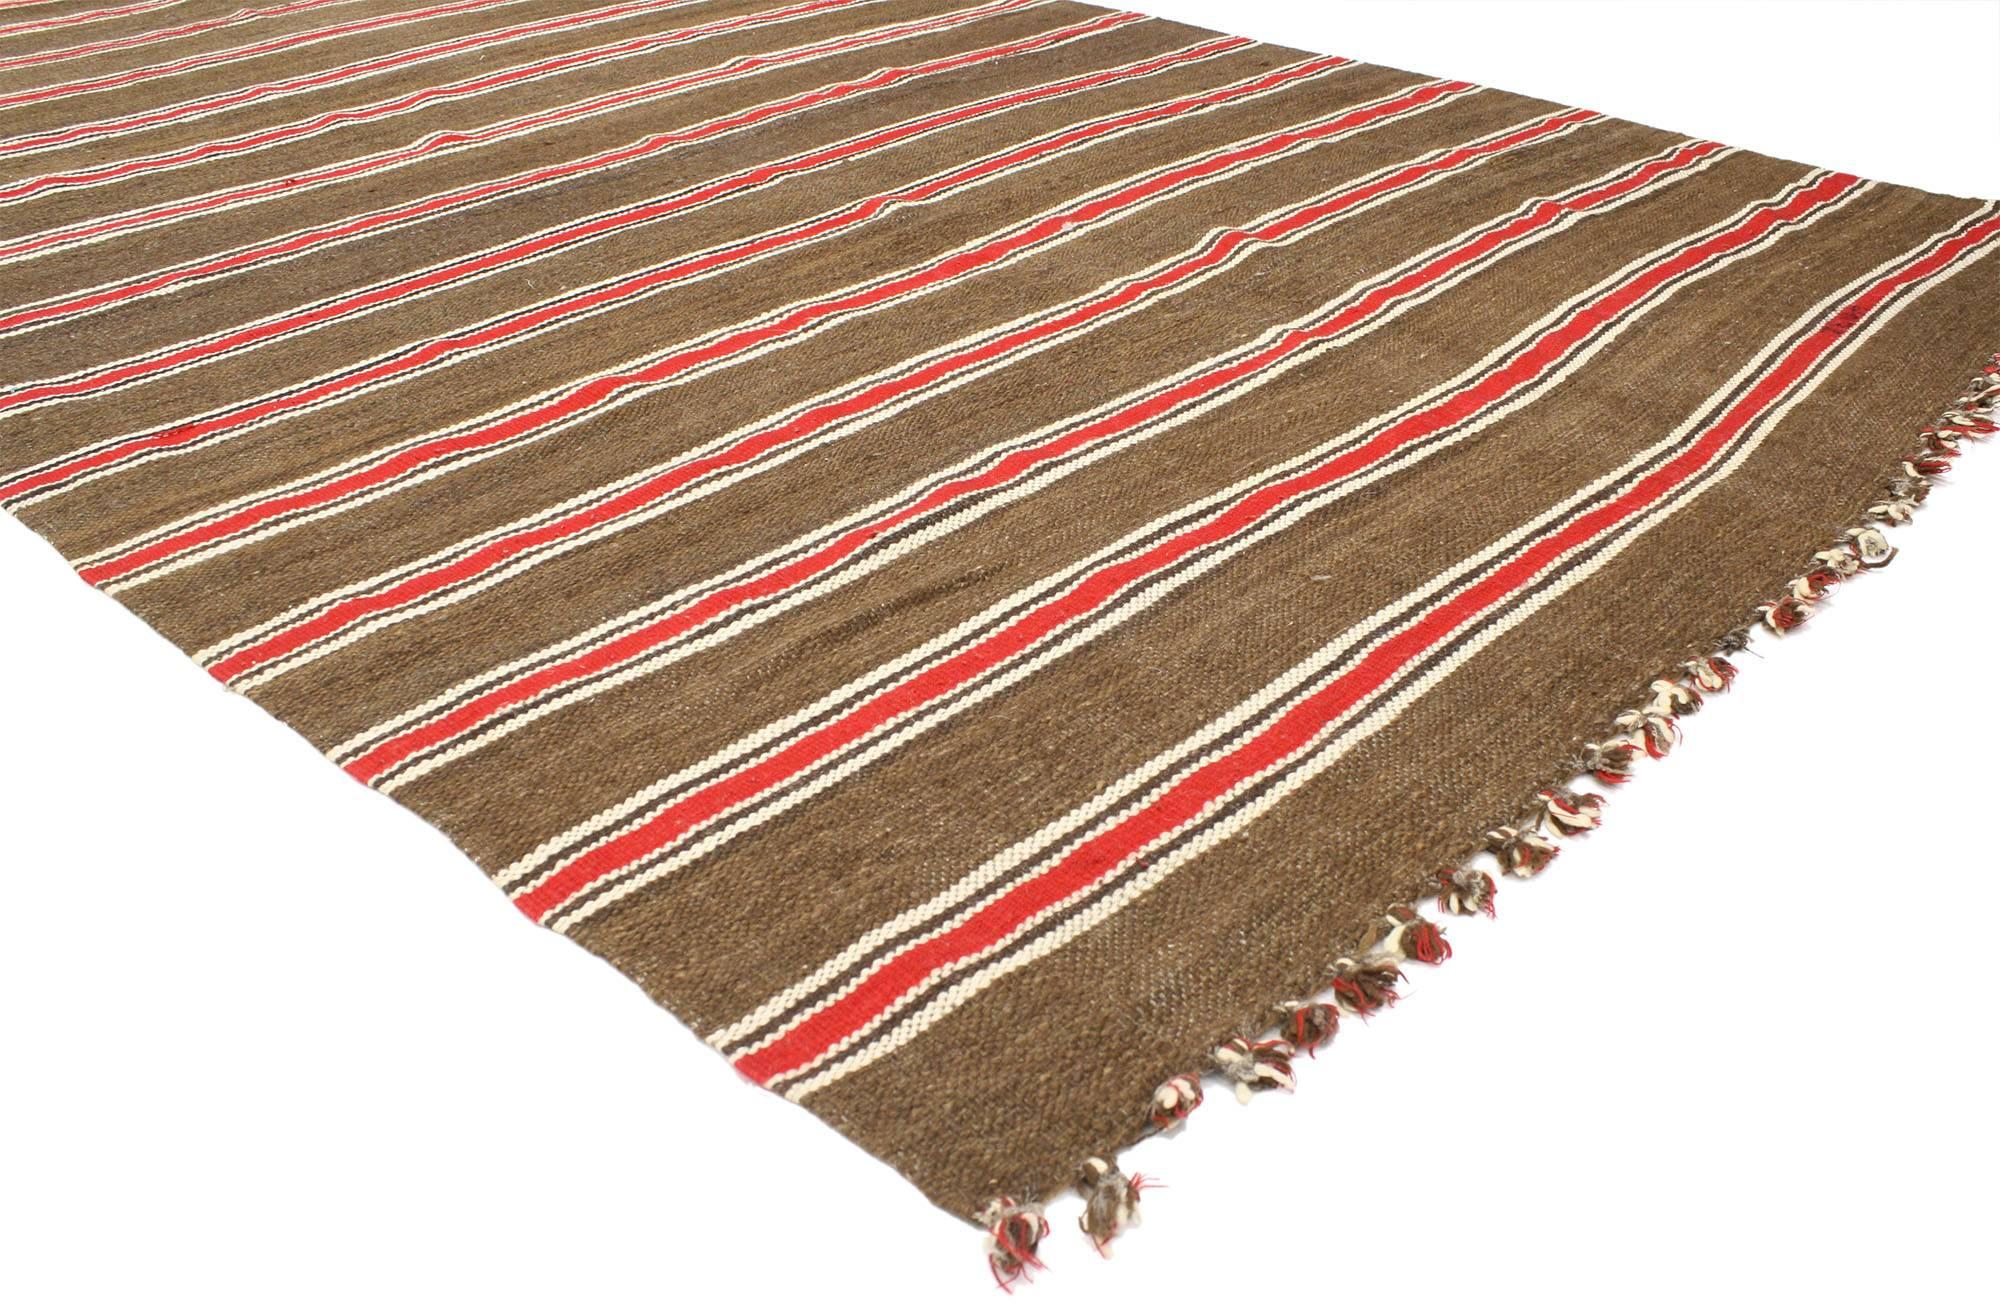 Hand-Woven Vintage Berber Moroccan Kilim Striped Rug, Wide Hallway Runner with Stripes